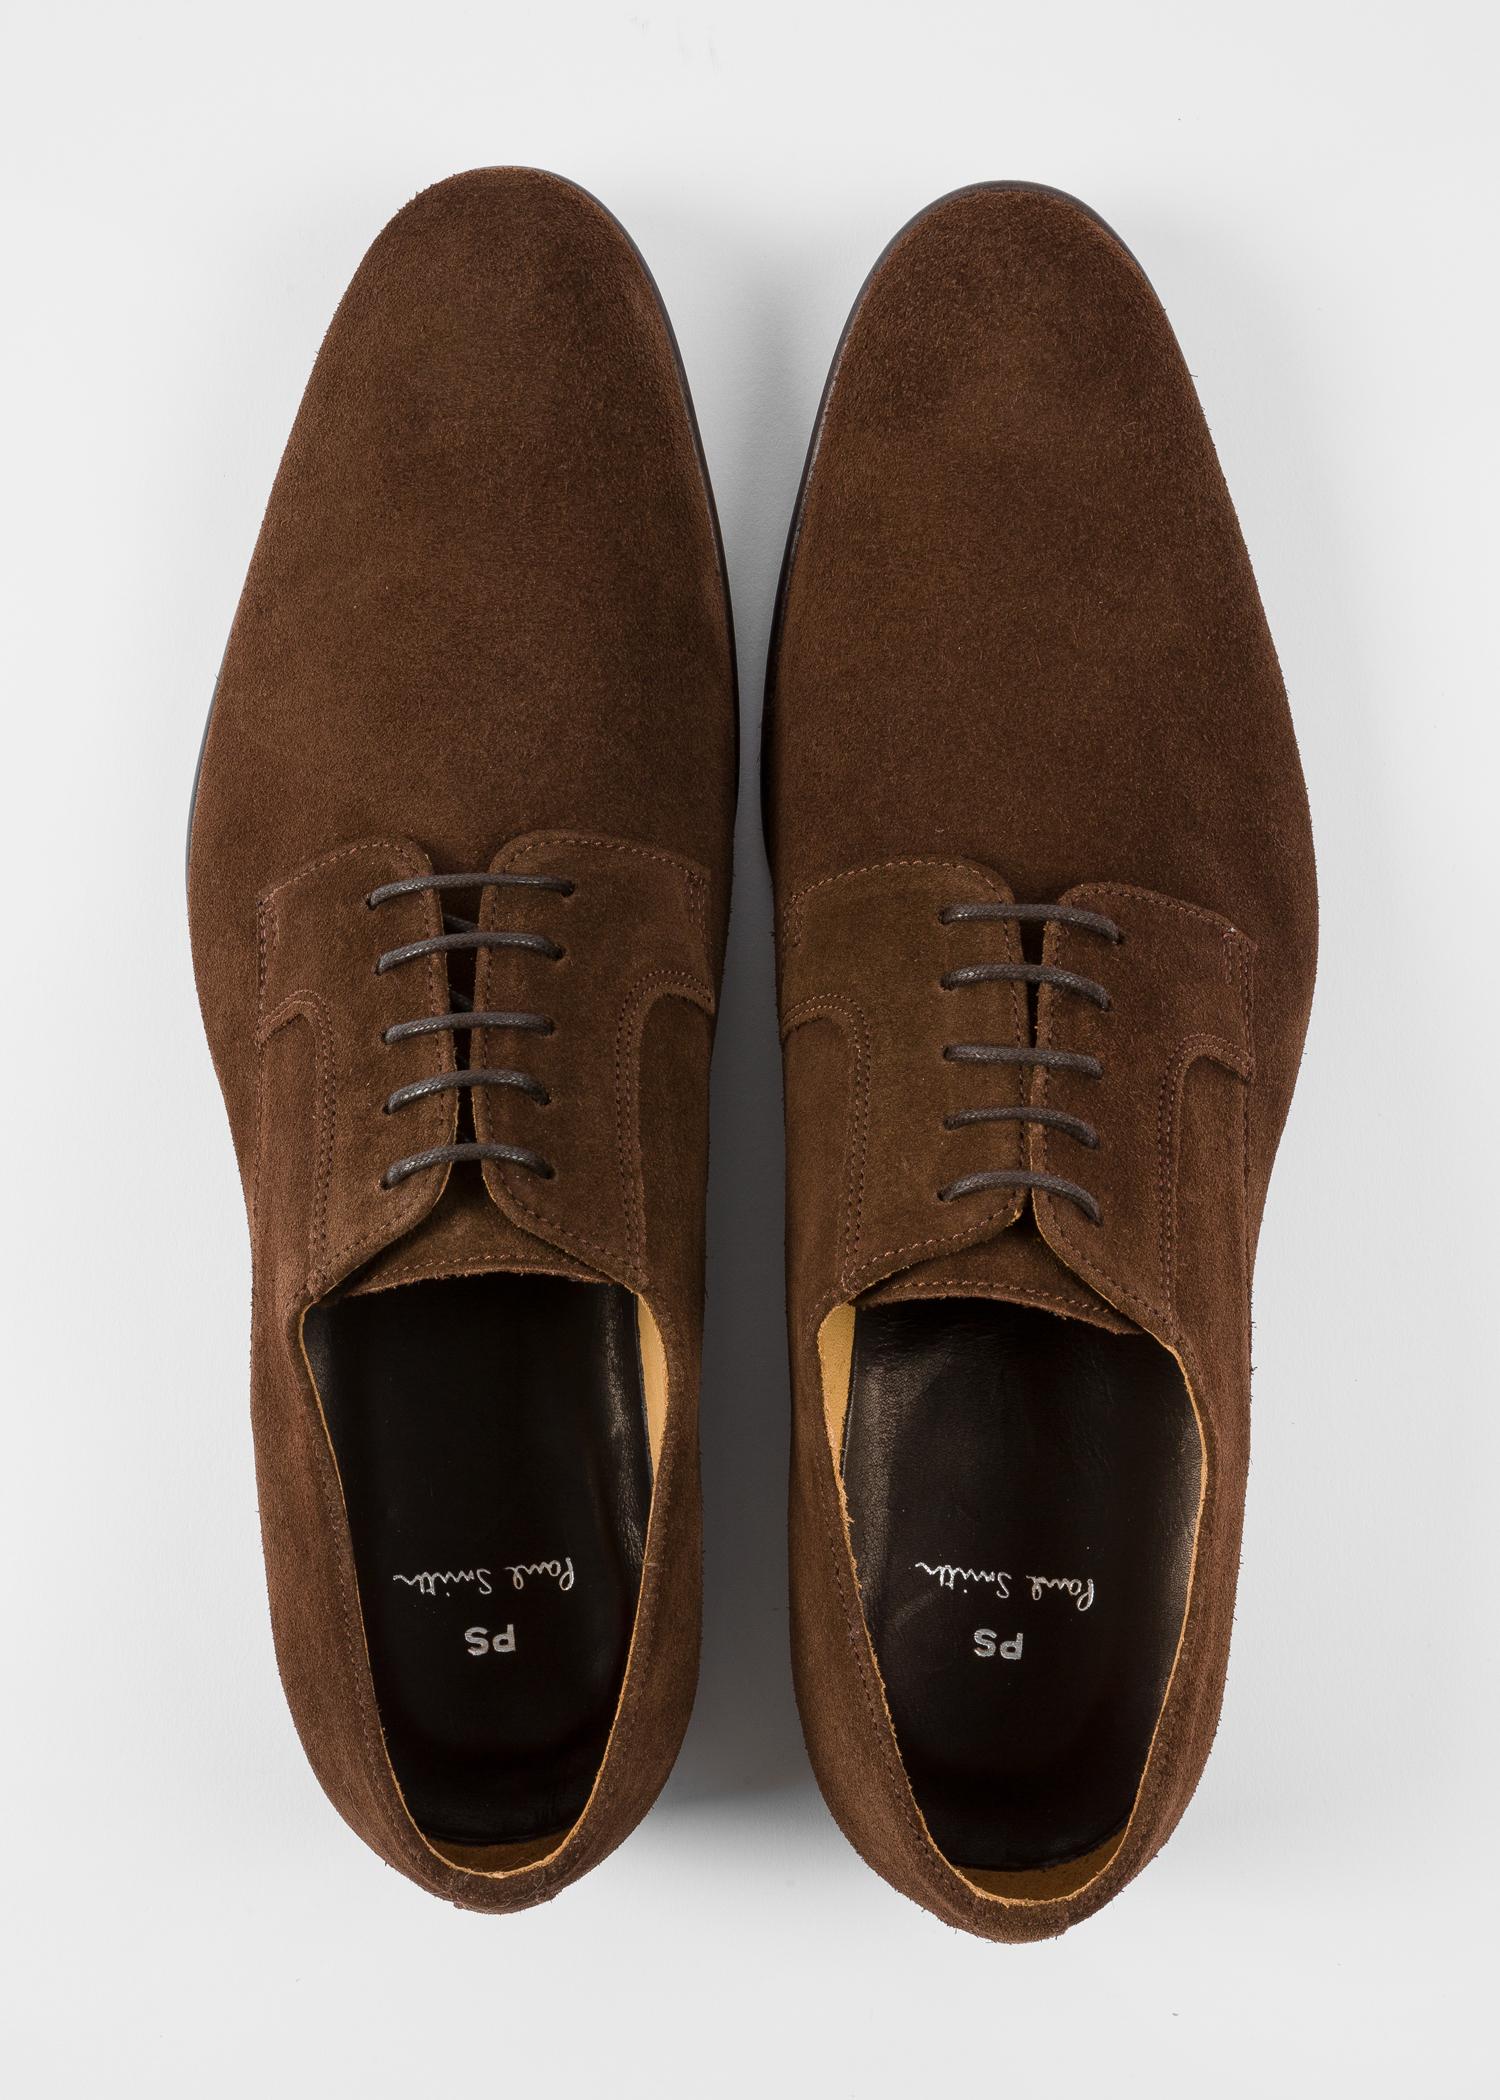 Paul Smith Chocolate Suede Leather 'gould' Derby Shoes in Brown for Men -  Lyst